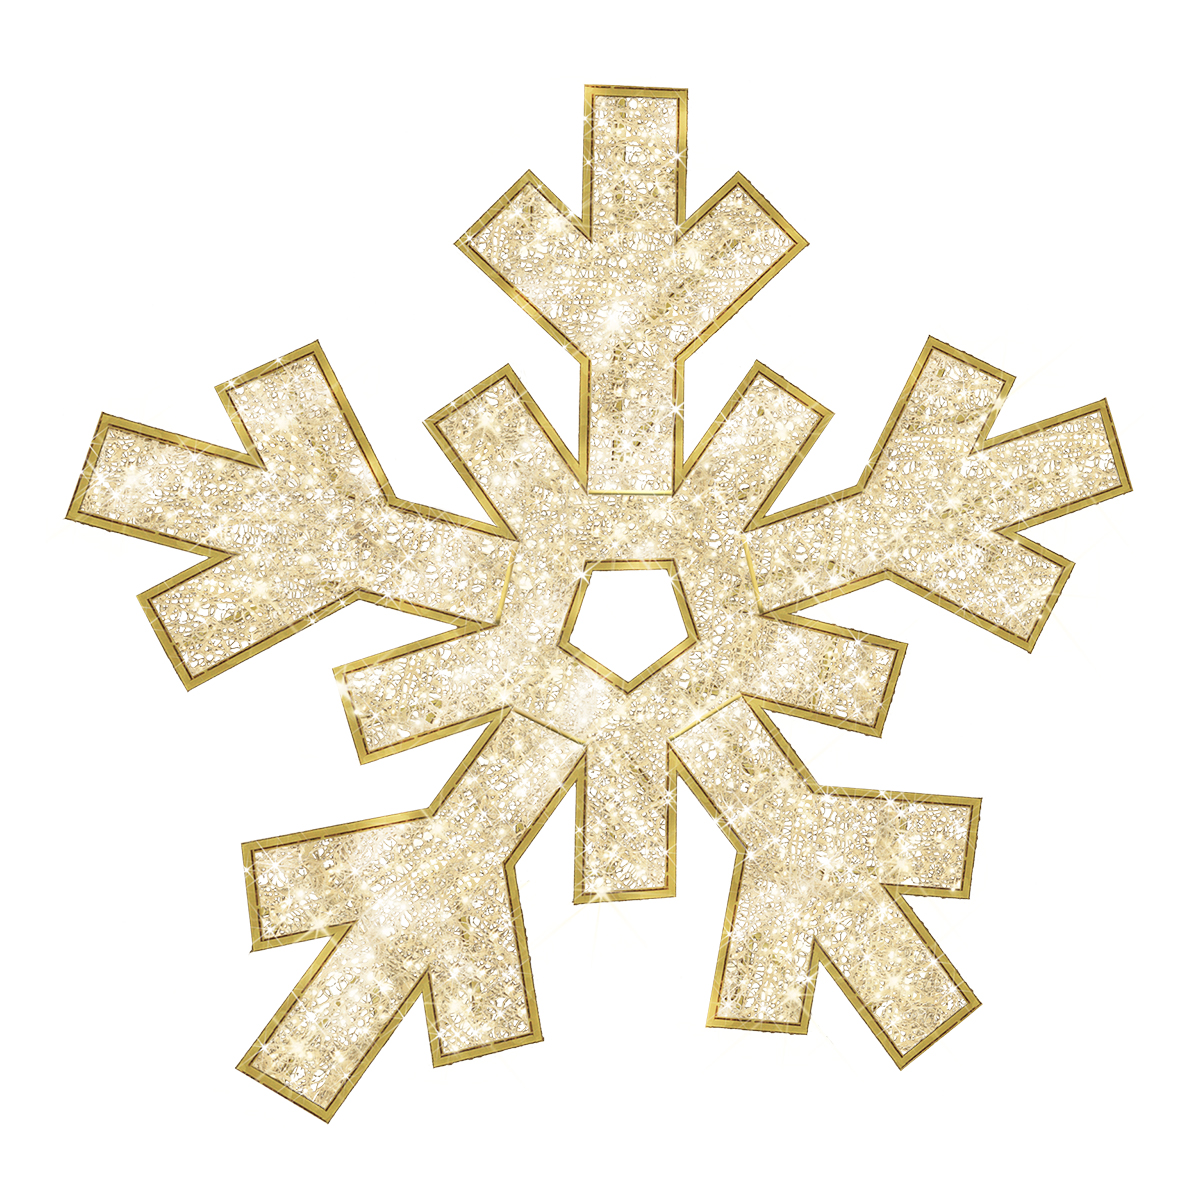 2D Snowflake - Christmas Display - Cool White - Gold - Large - 9.8ft tall